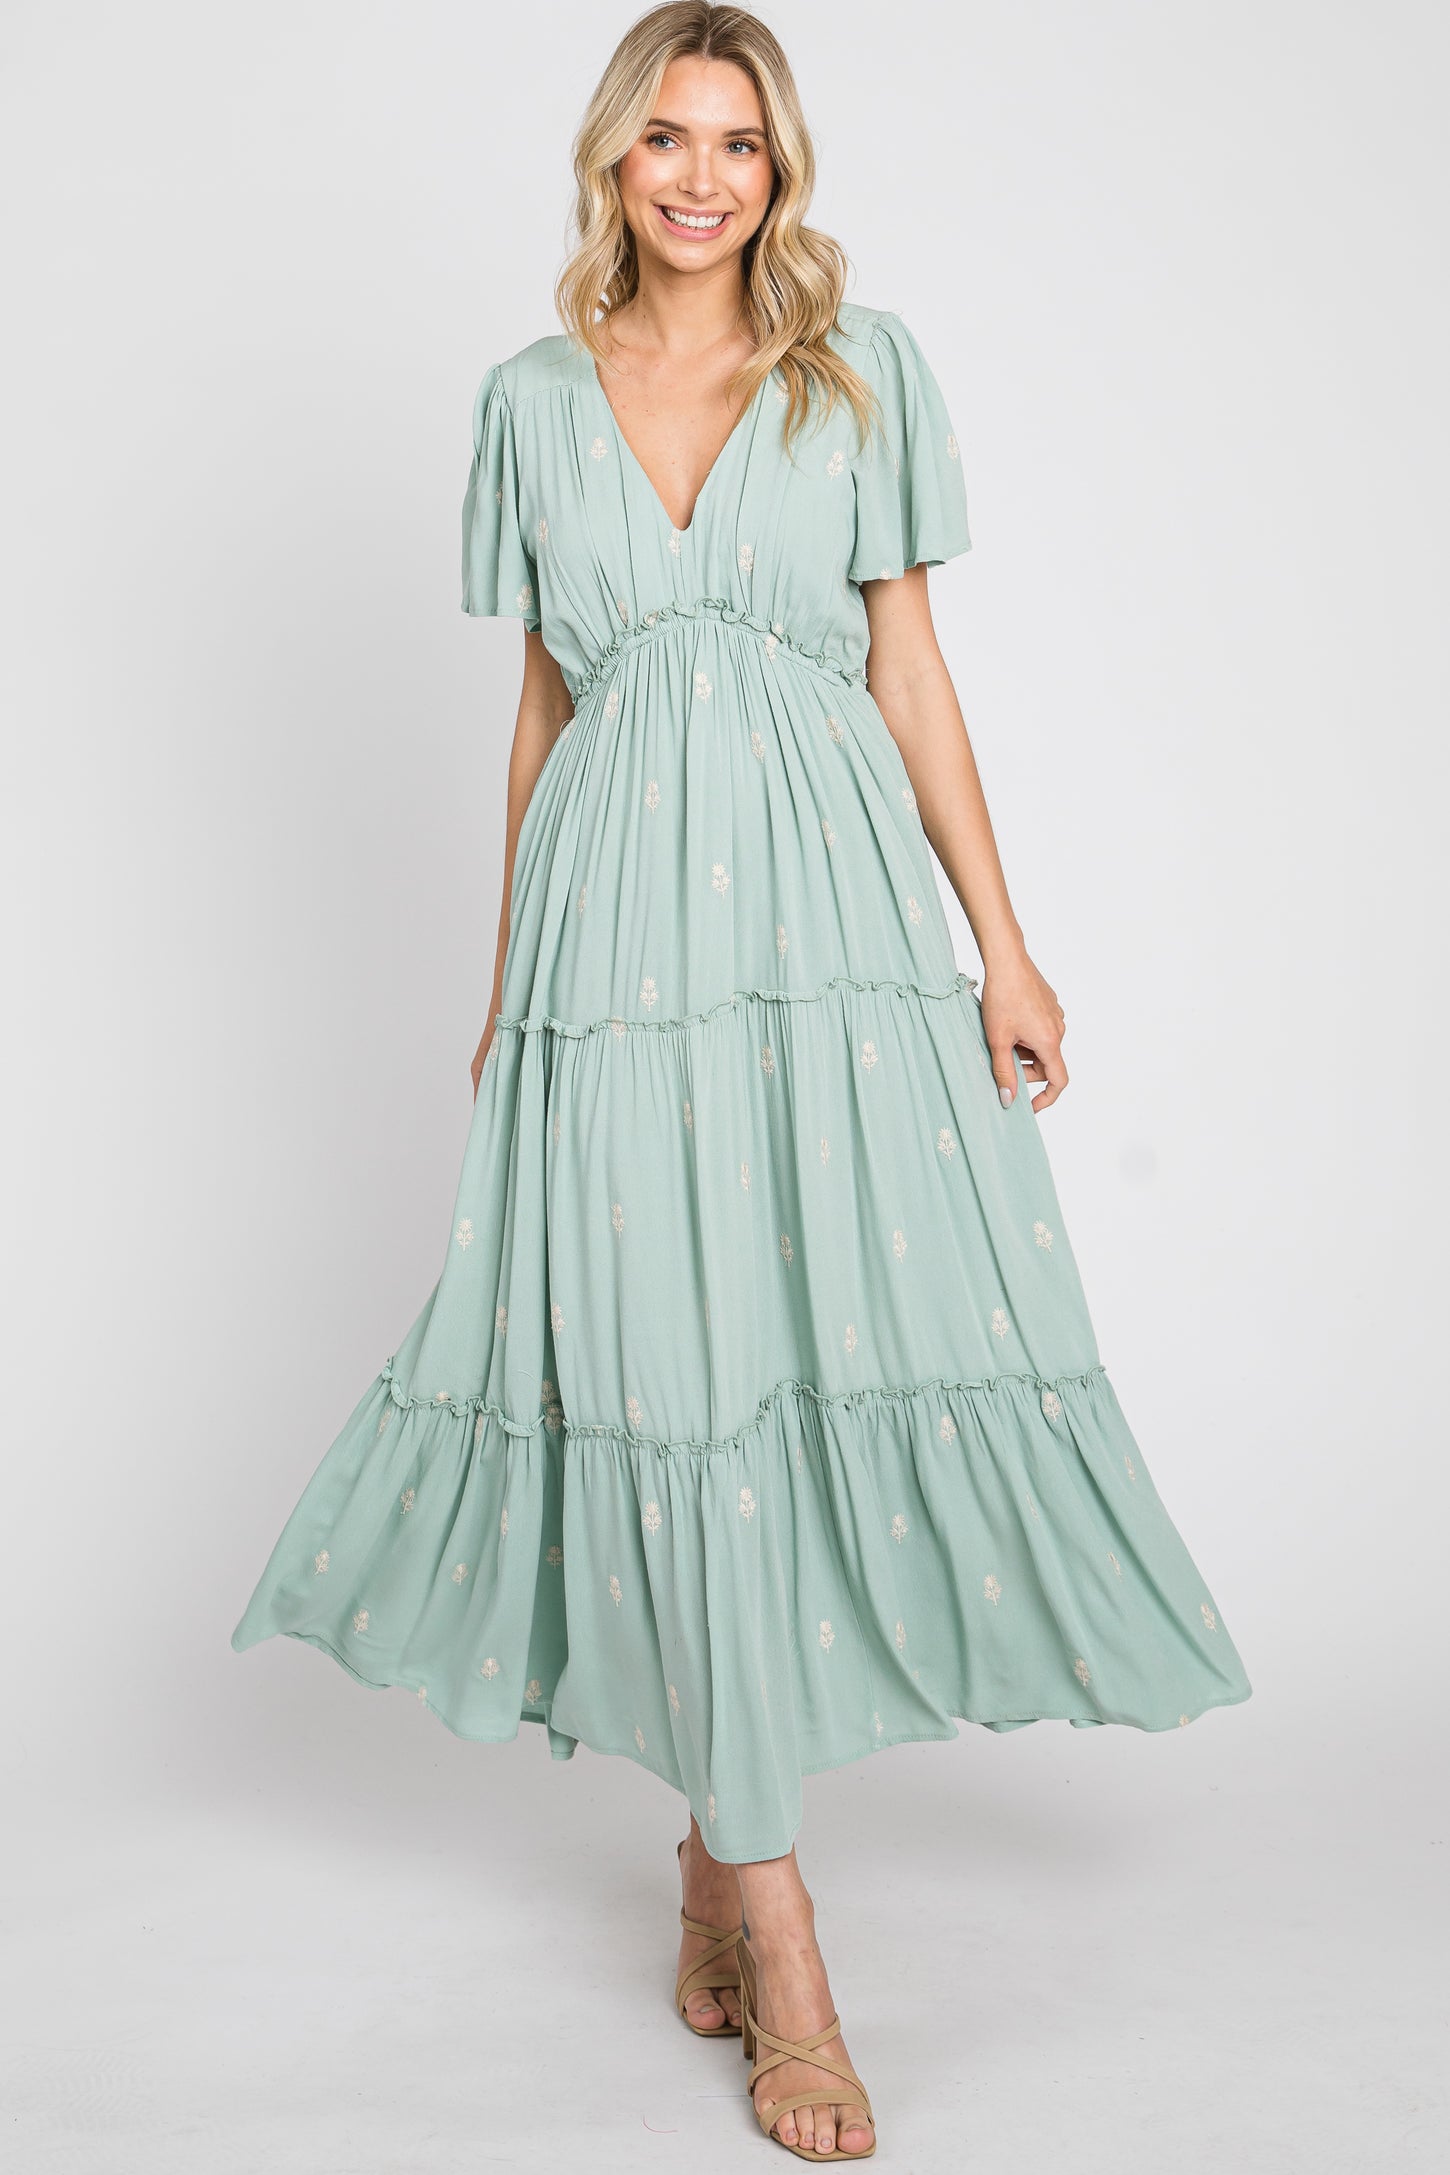 Mint Green Floral Embroidered Tiered Maxi Dress